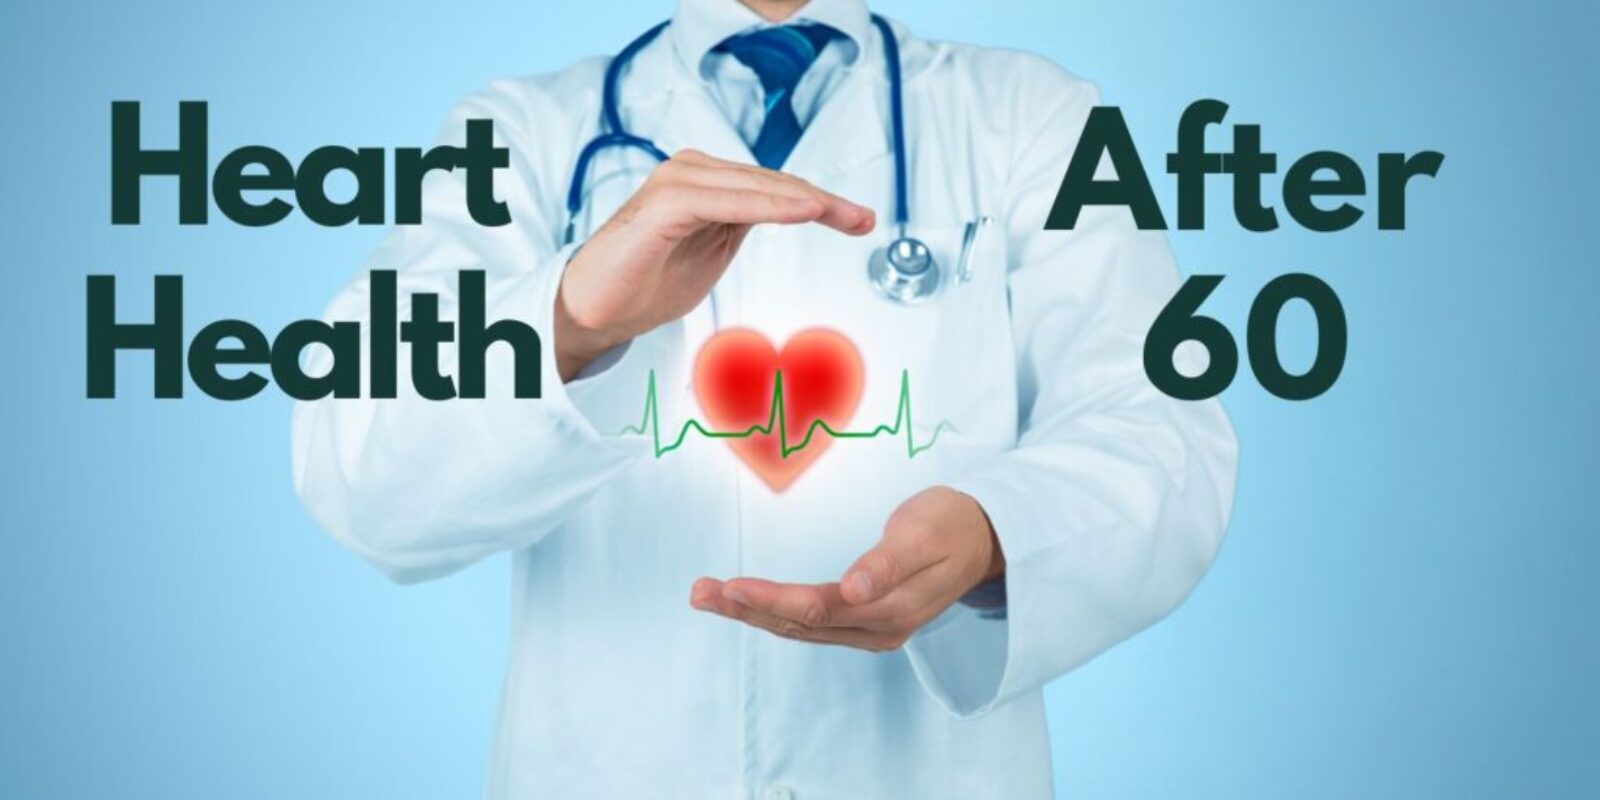 Heart Health After 60: What You Need to Know!